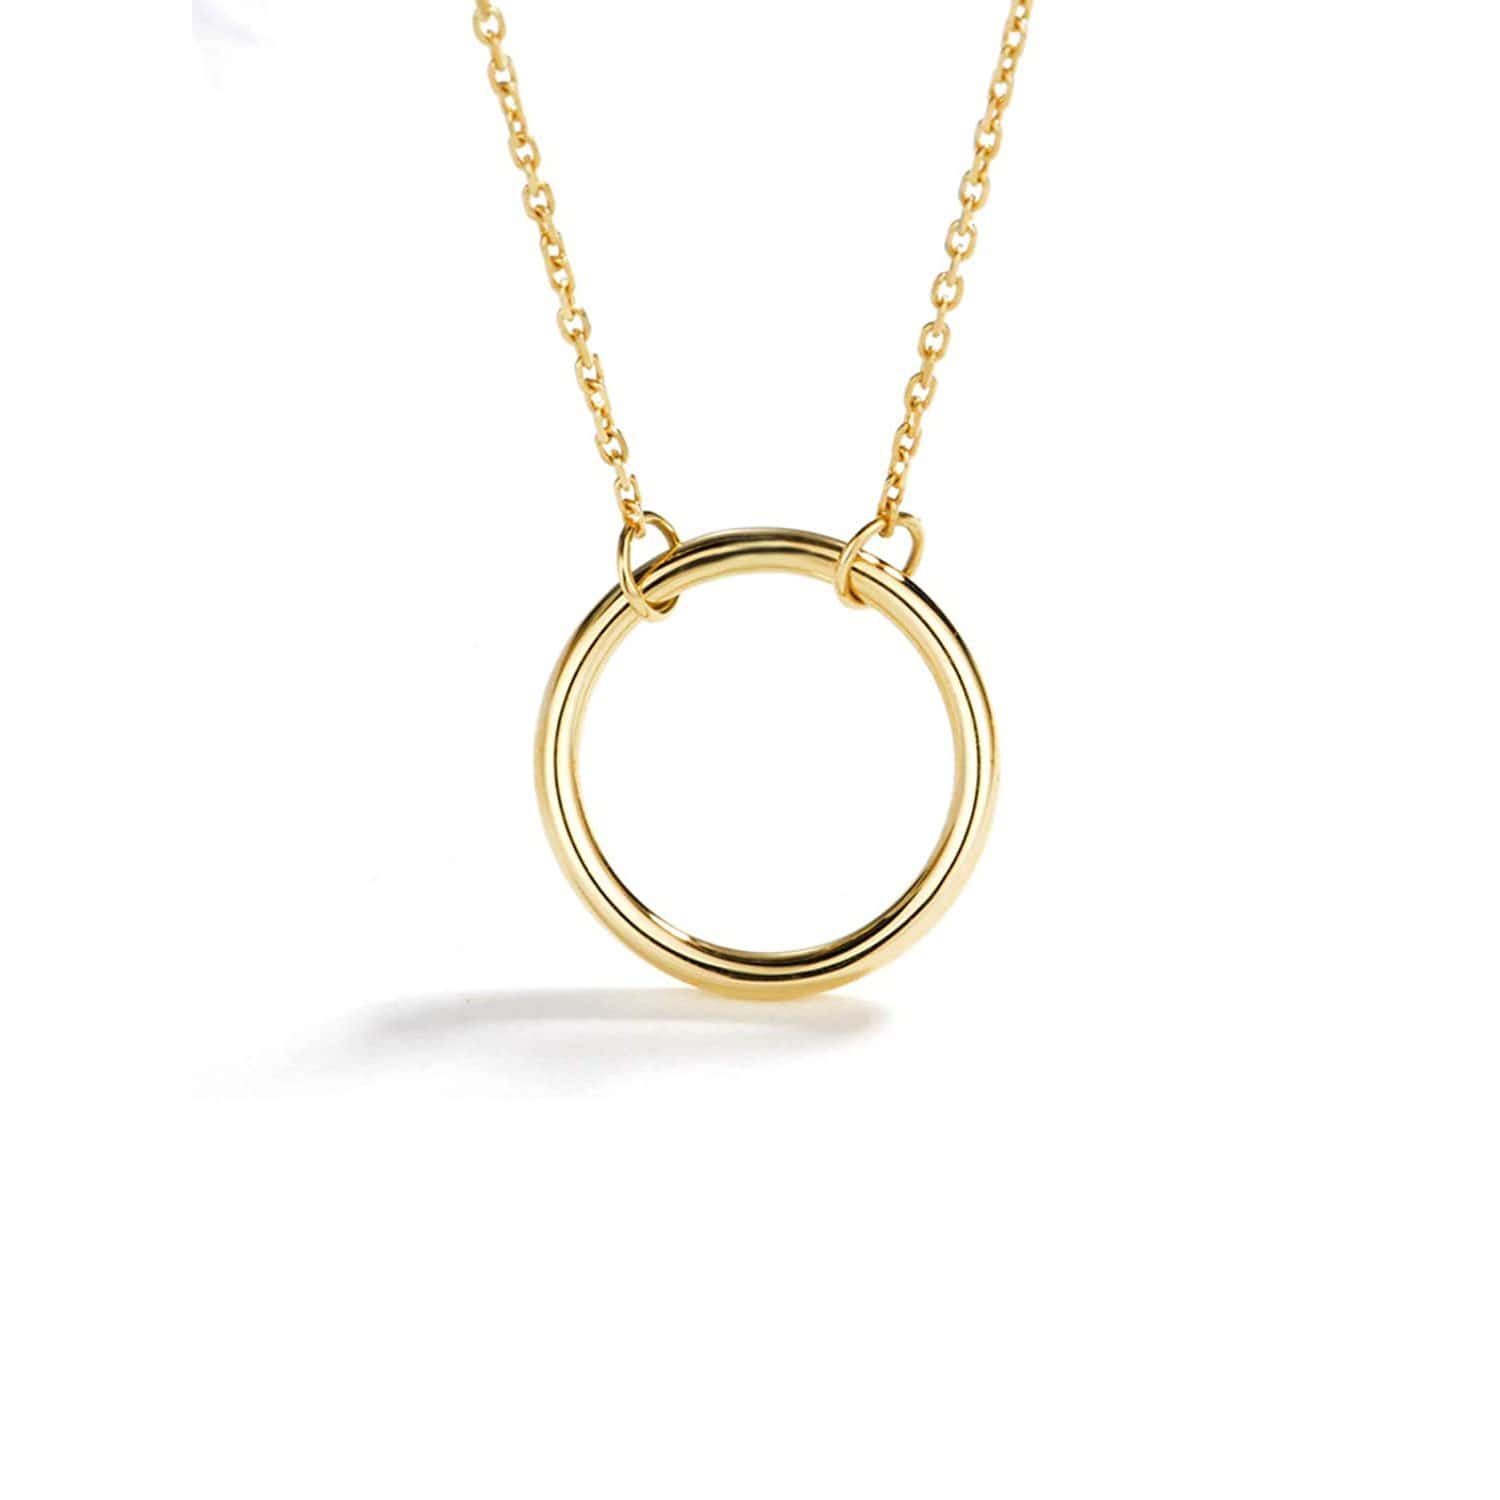 FANCIME Karma Open Circle 14K Solid Yellow Gold Necklace Main